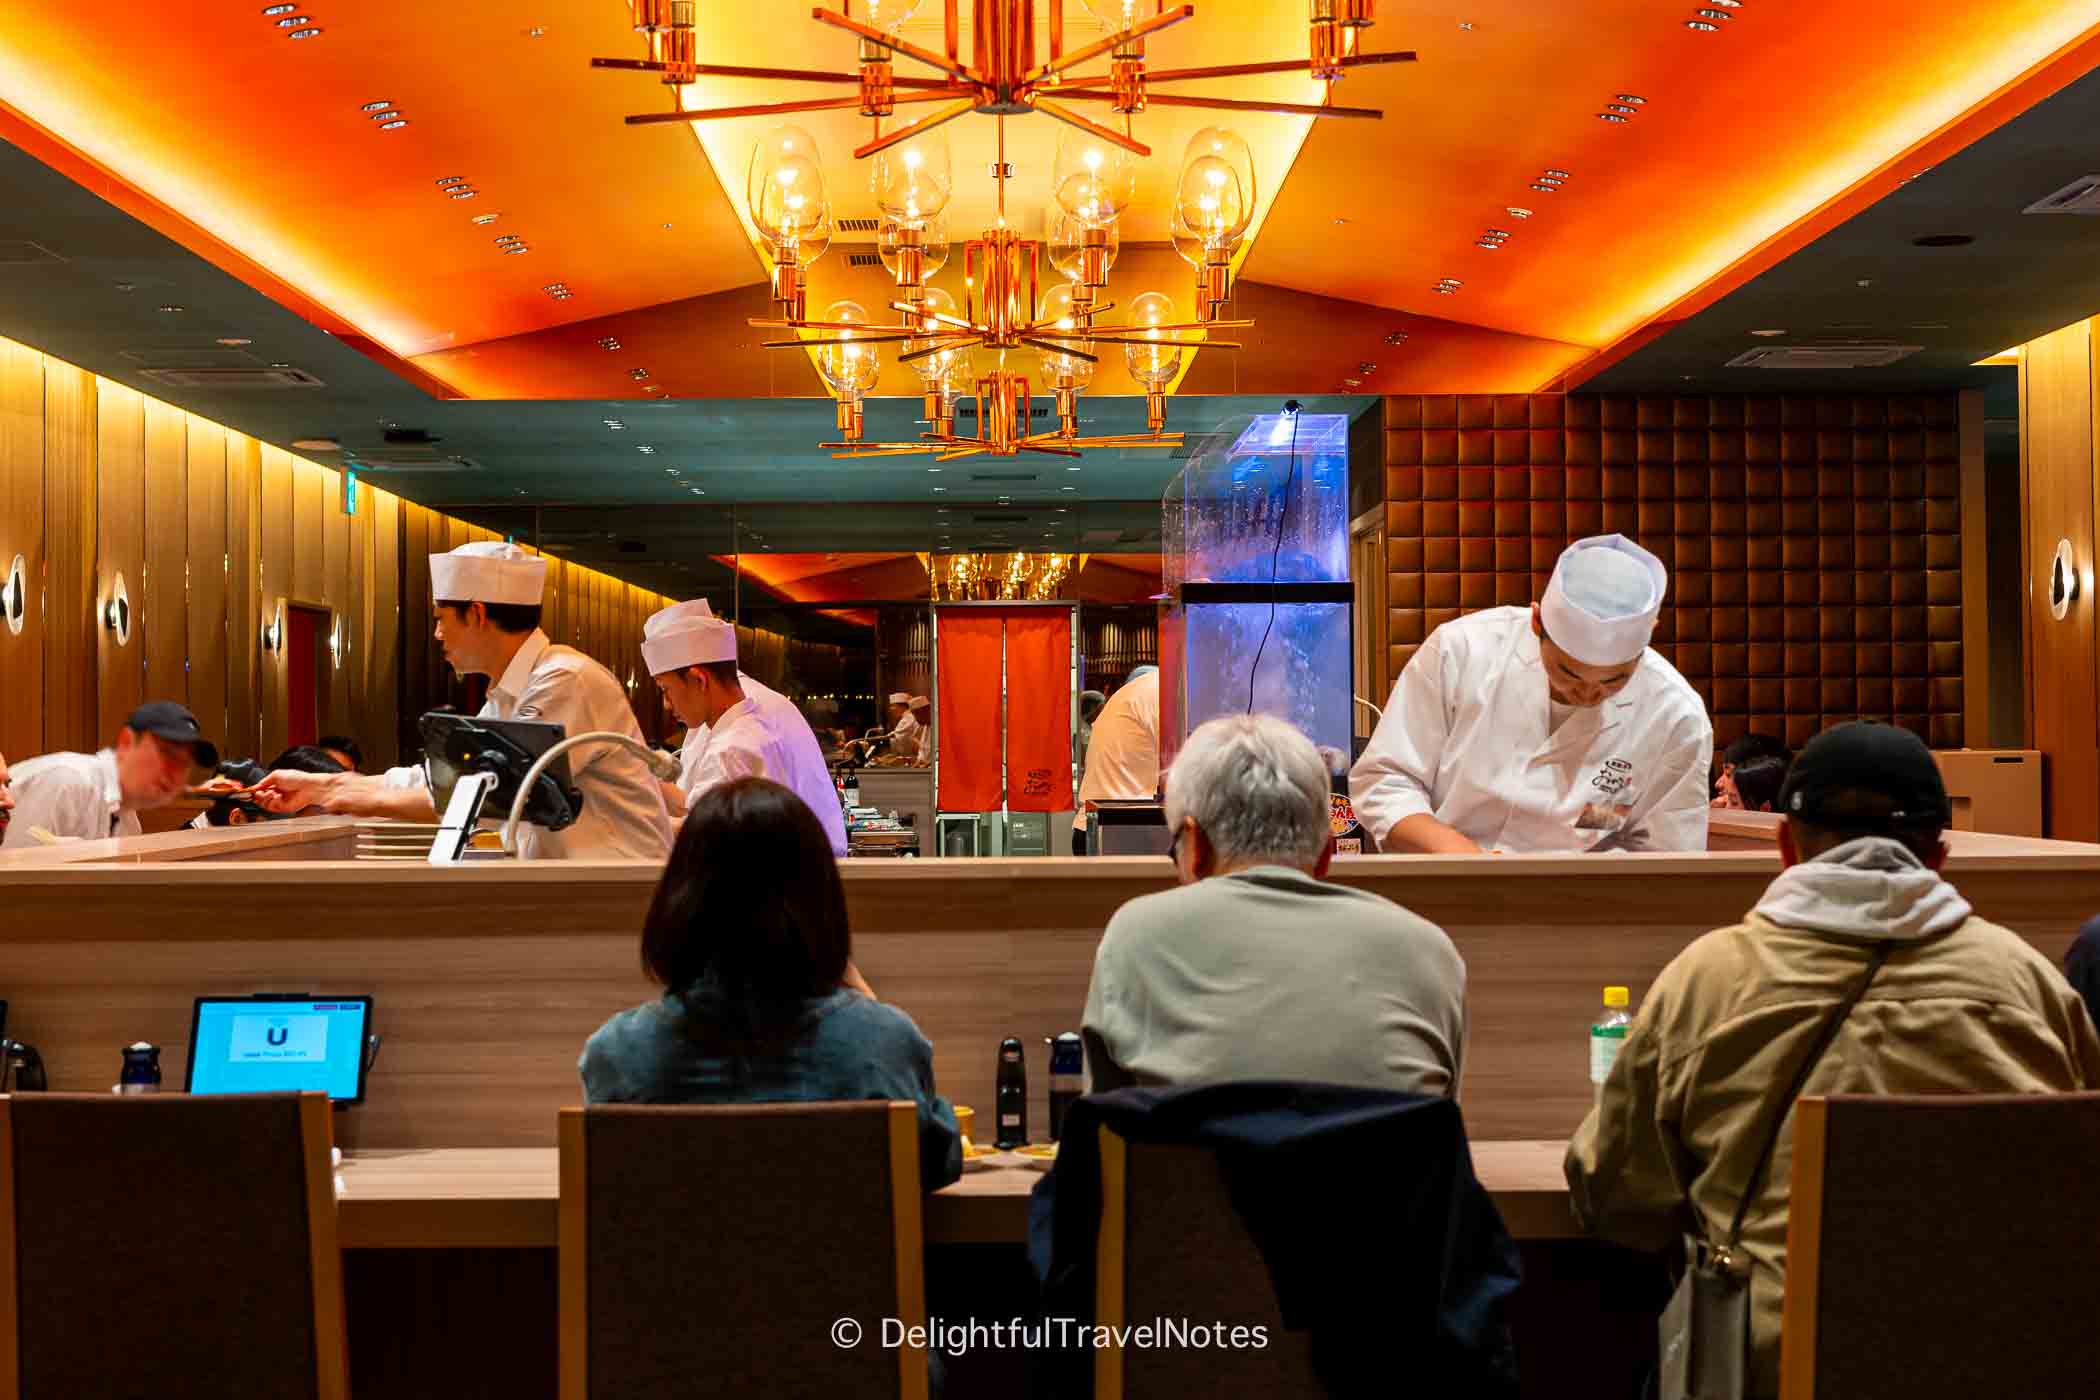 inside Kaiten Sushi Ginza Onodera in Osaka with counters and chefs working.